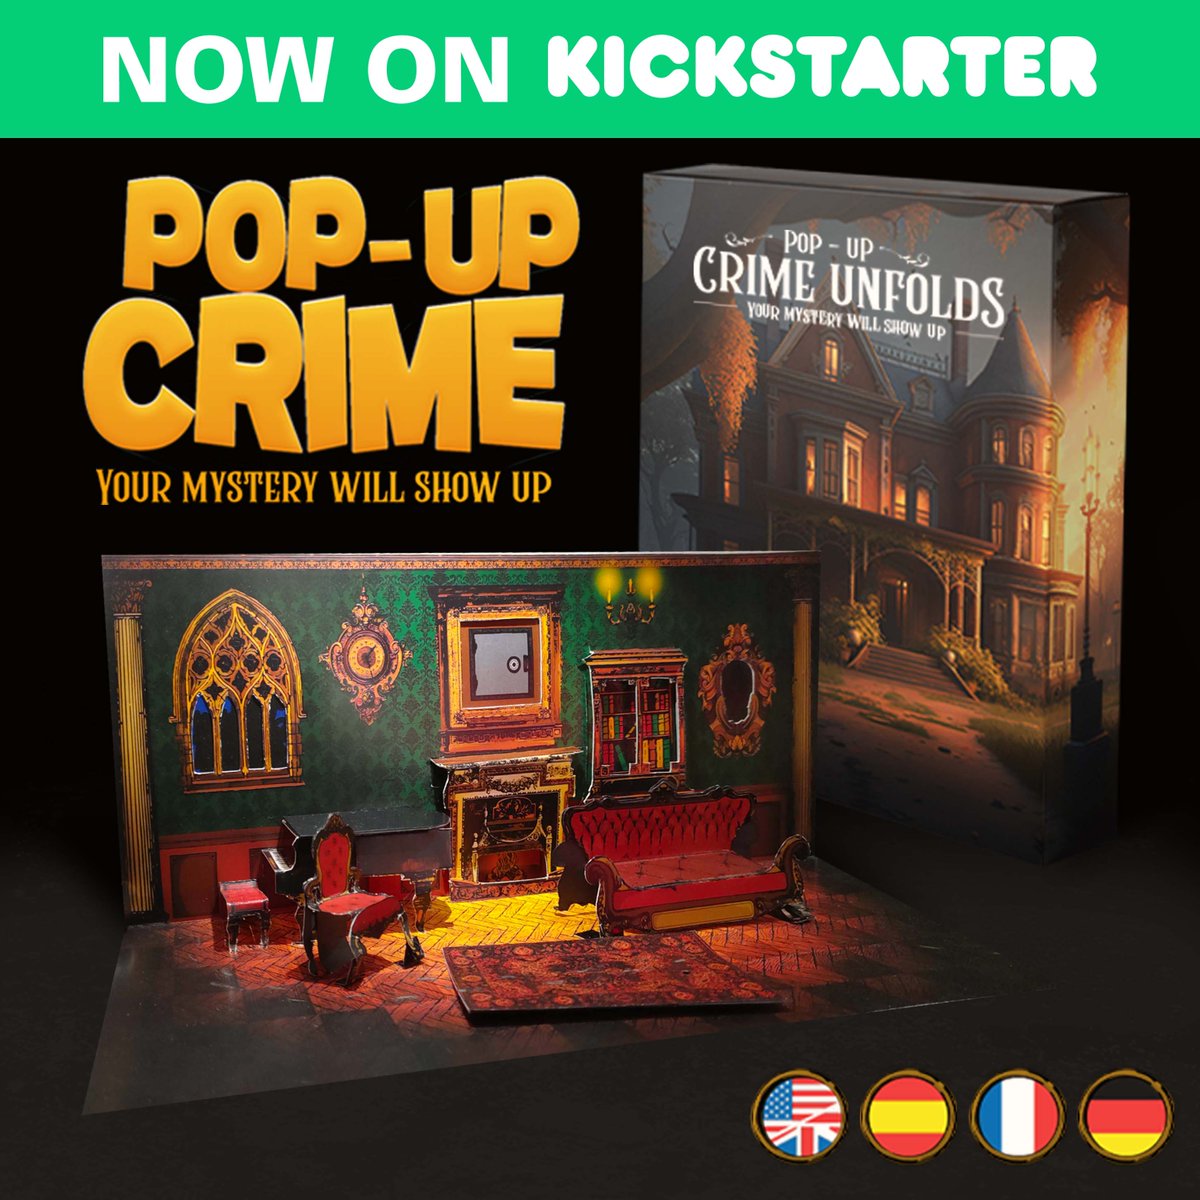 🥳It's here! CRIME UNFOLDS is on Kickstarter🥳, remember that the first ones to get the game will benefit from discounts! #kickstarter @kickstarter #escapegame #nowonkickstarter #popupmystery #indiegames